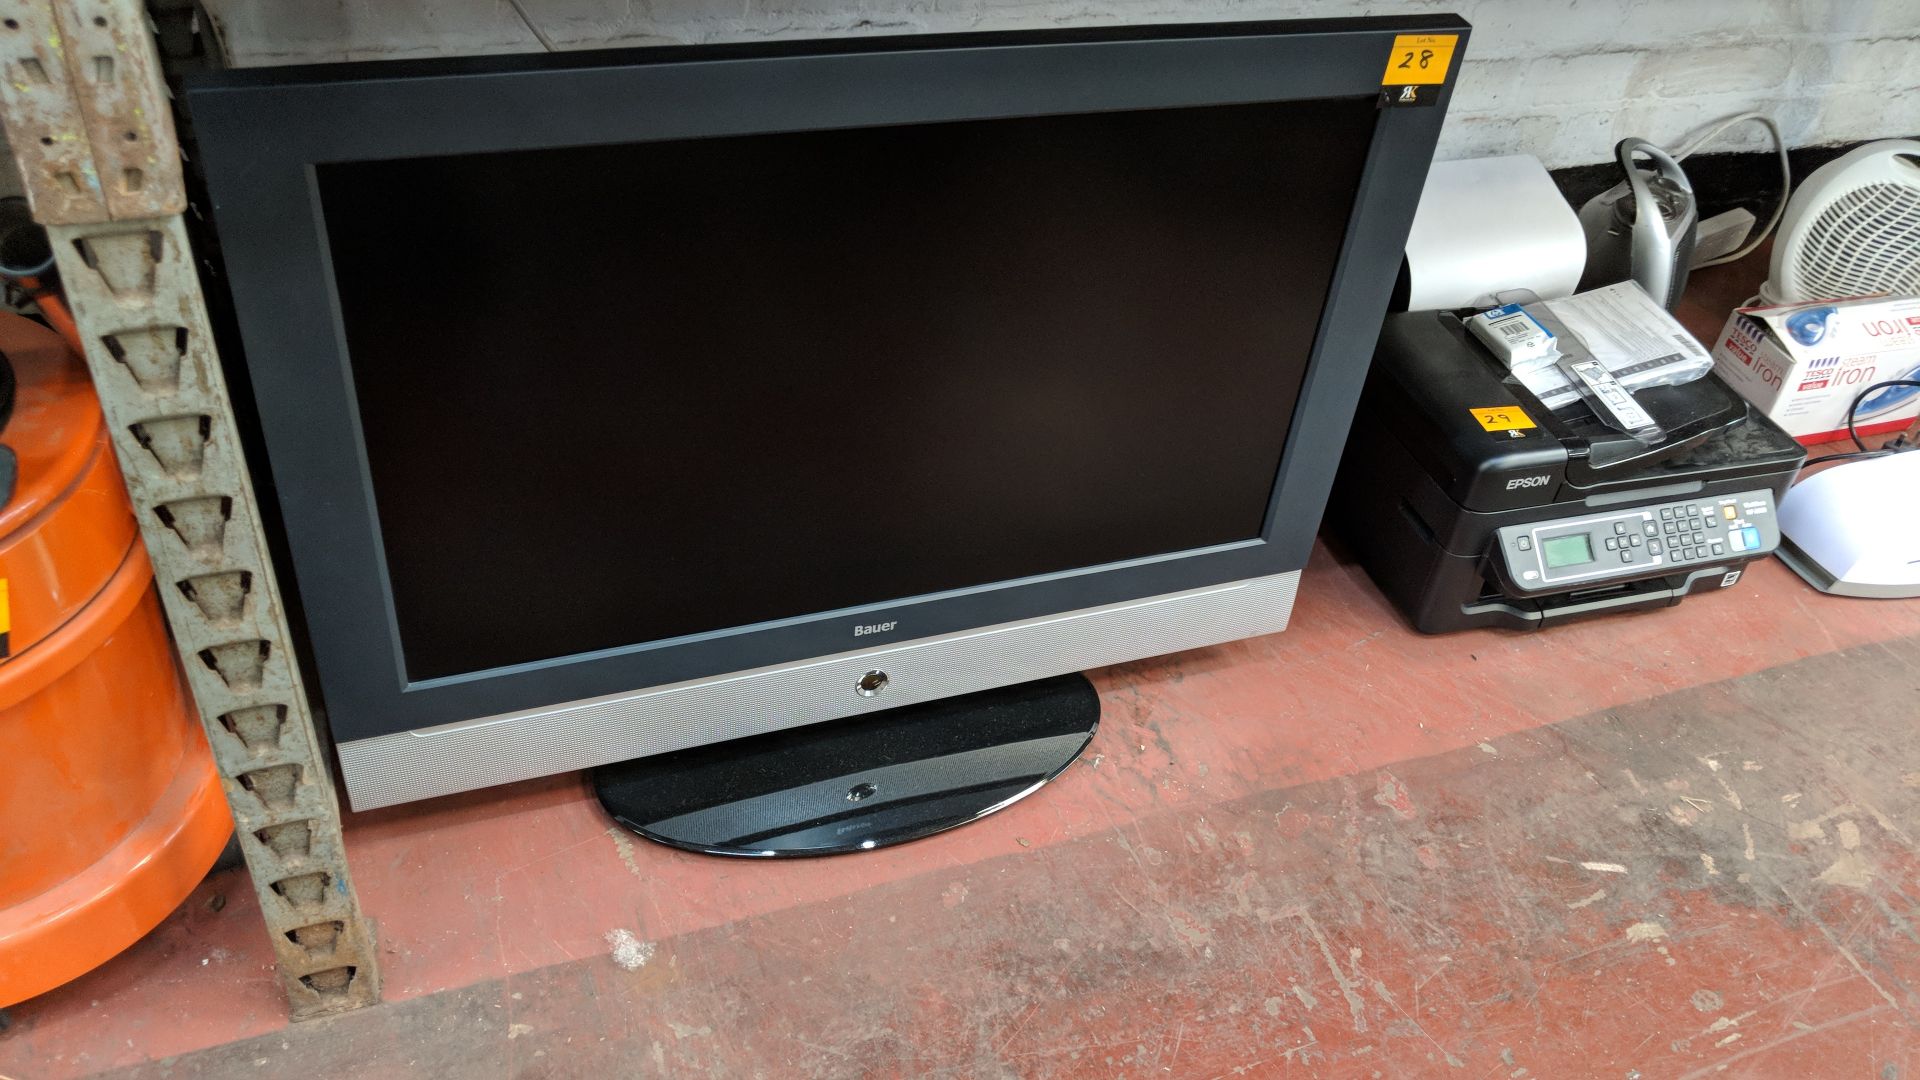 Bauer 32" LCD TV IMPORTANT: Please remember goods successfully bid upon must be paid for and